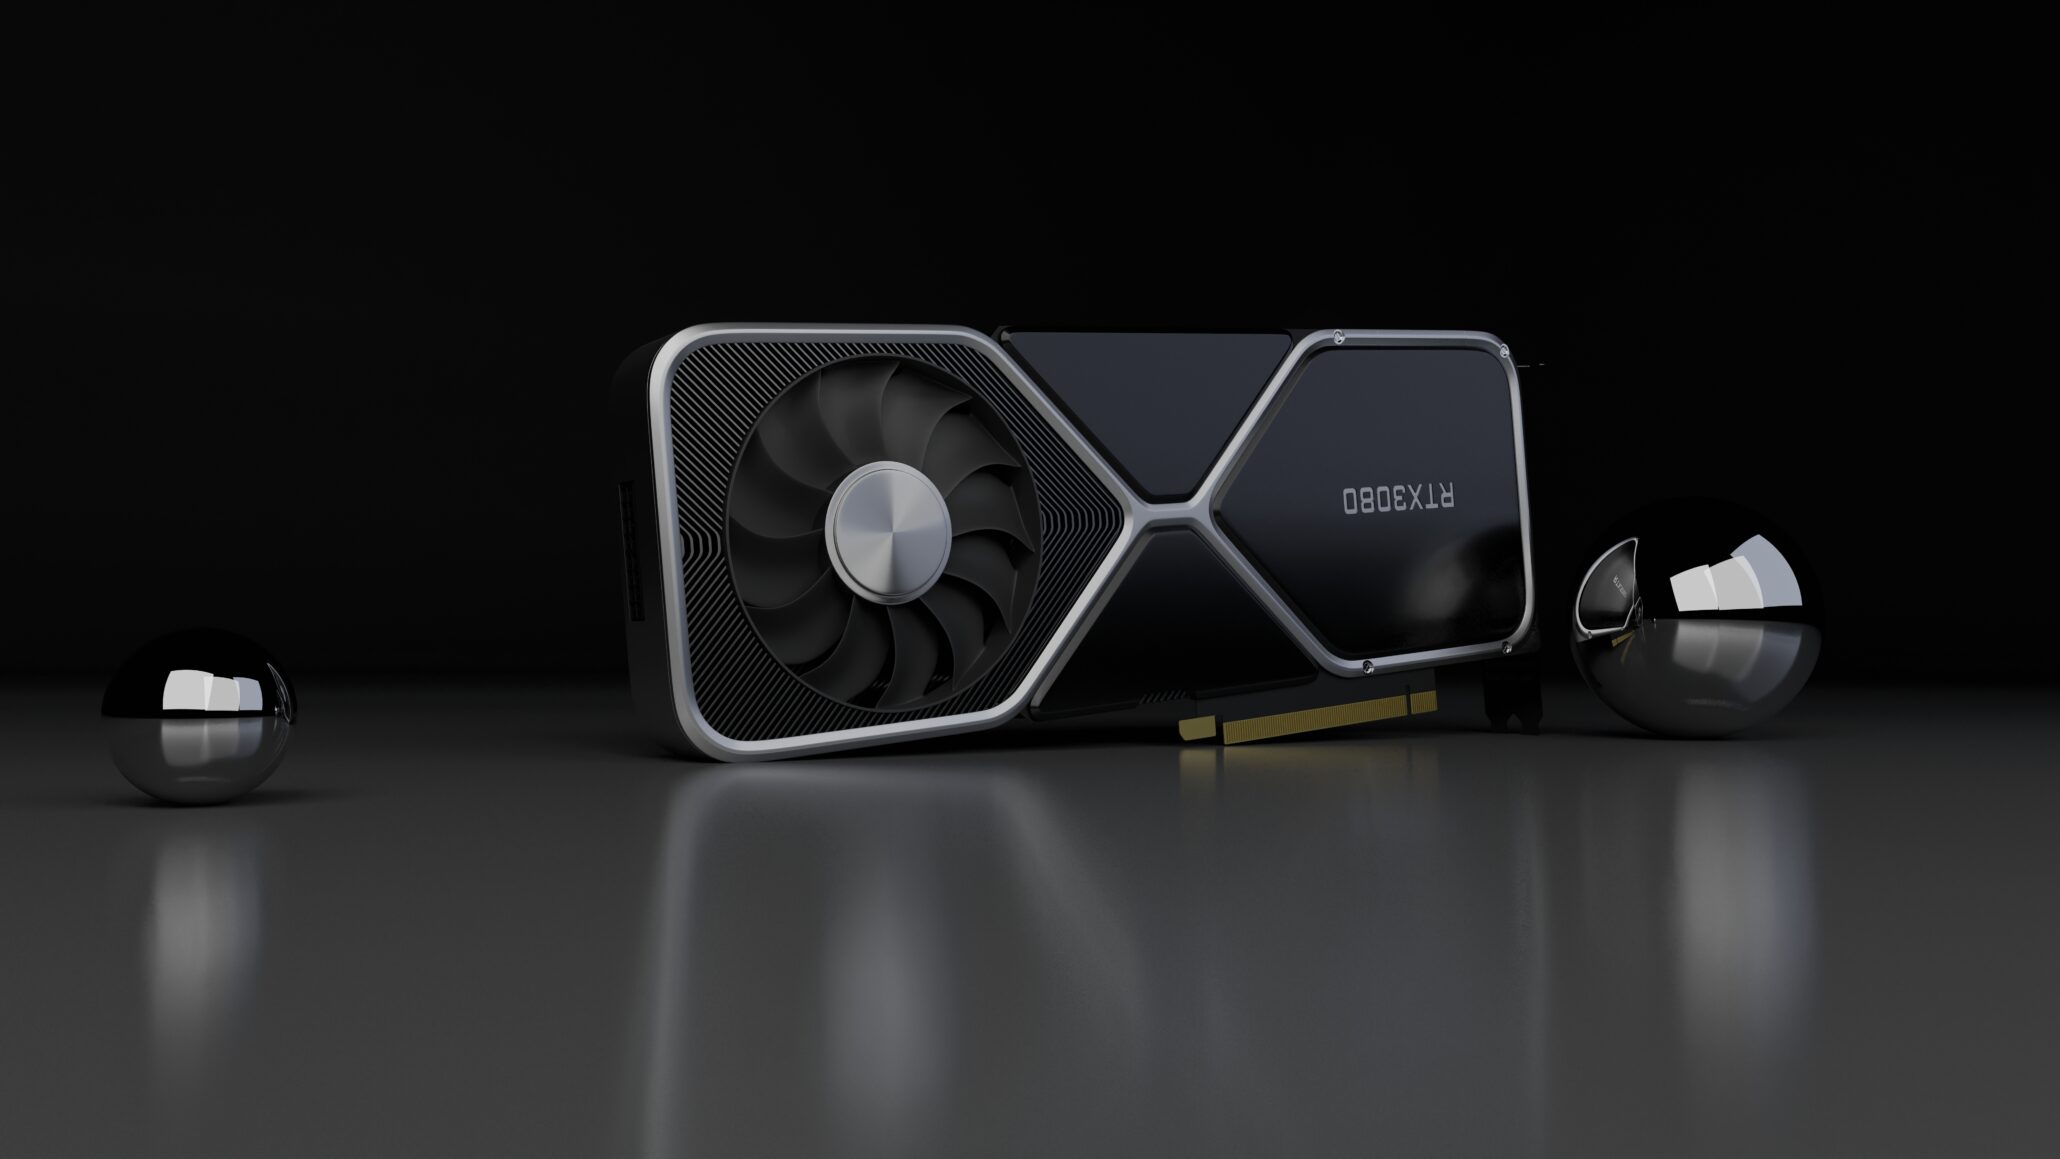 NVIDIA Ampere GA102 may offer up to 195 MHz higher boosts compared to RTX 2080 Ti; new 12-pin power supply rumored to debut on Founders Edition cards - NotebookCheck.net News